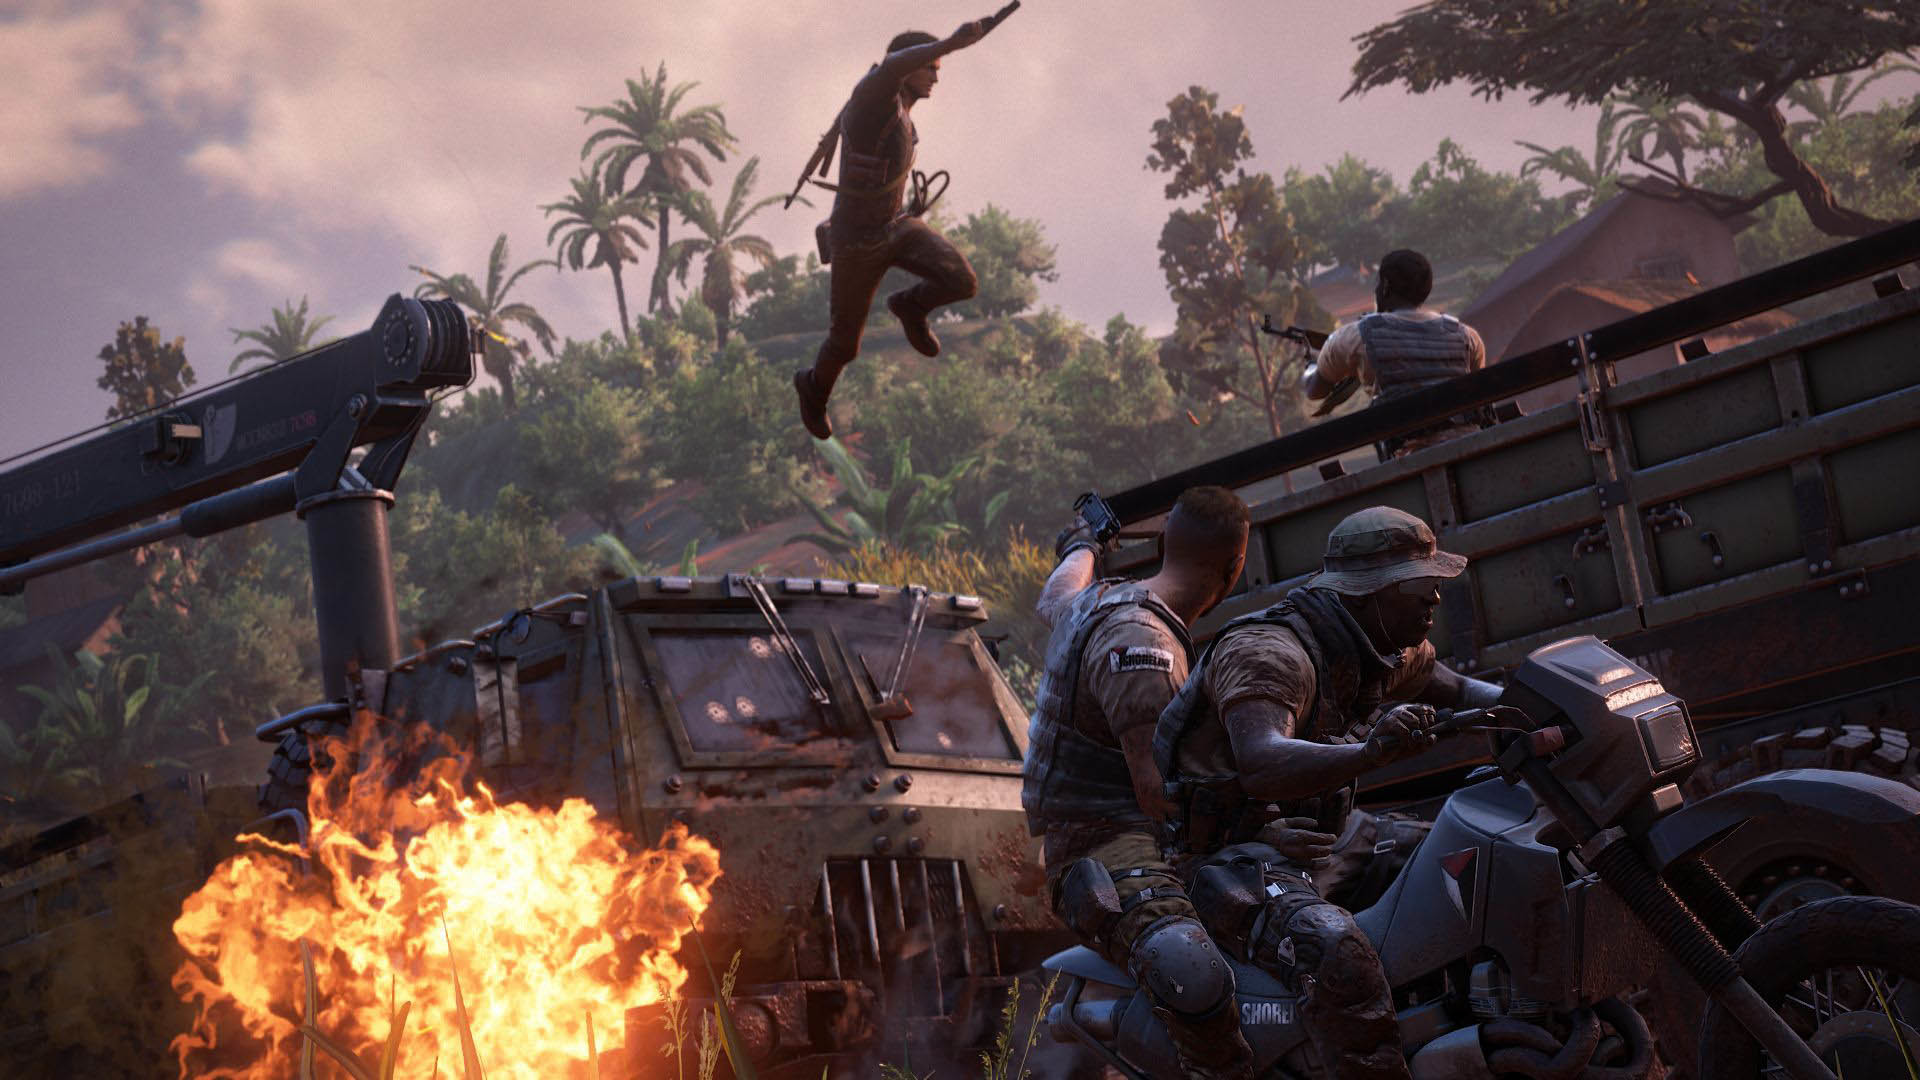 1920x1080 Uncharted 4 Explosive Action Scene on the Road  wallpaper